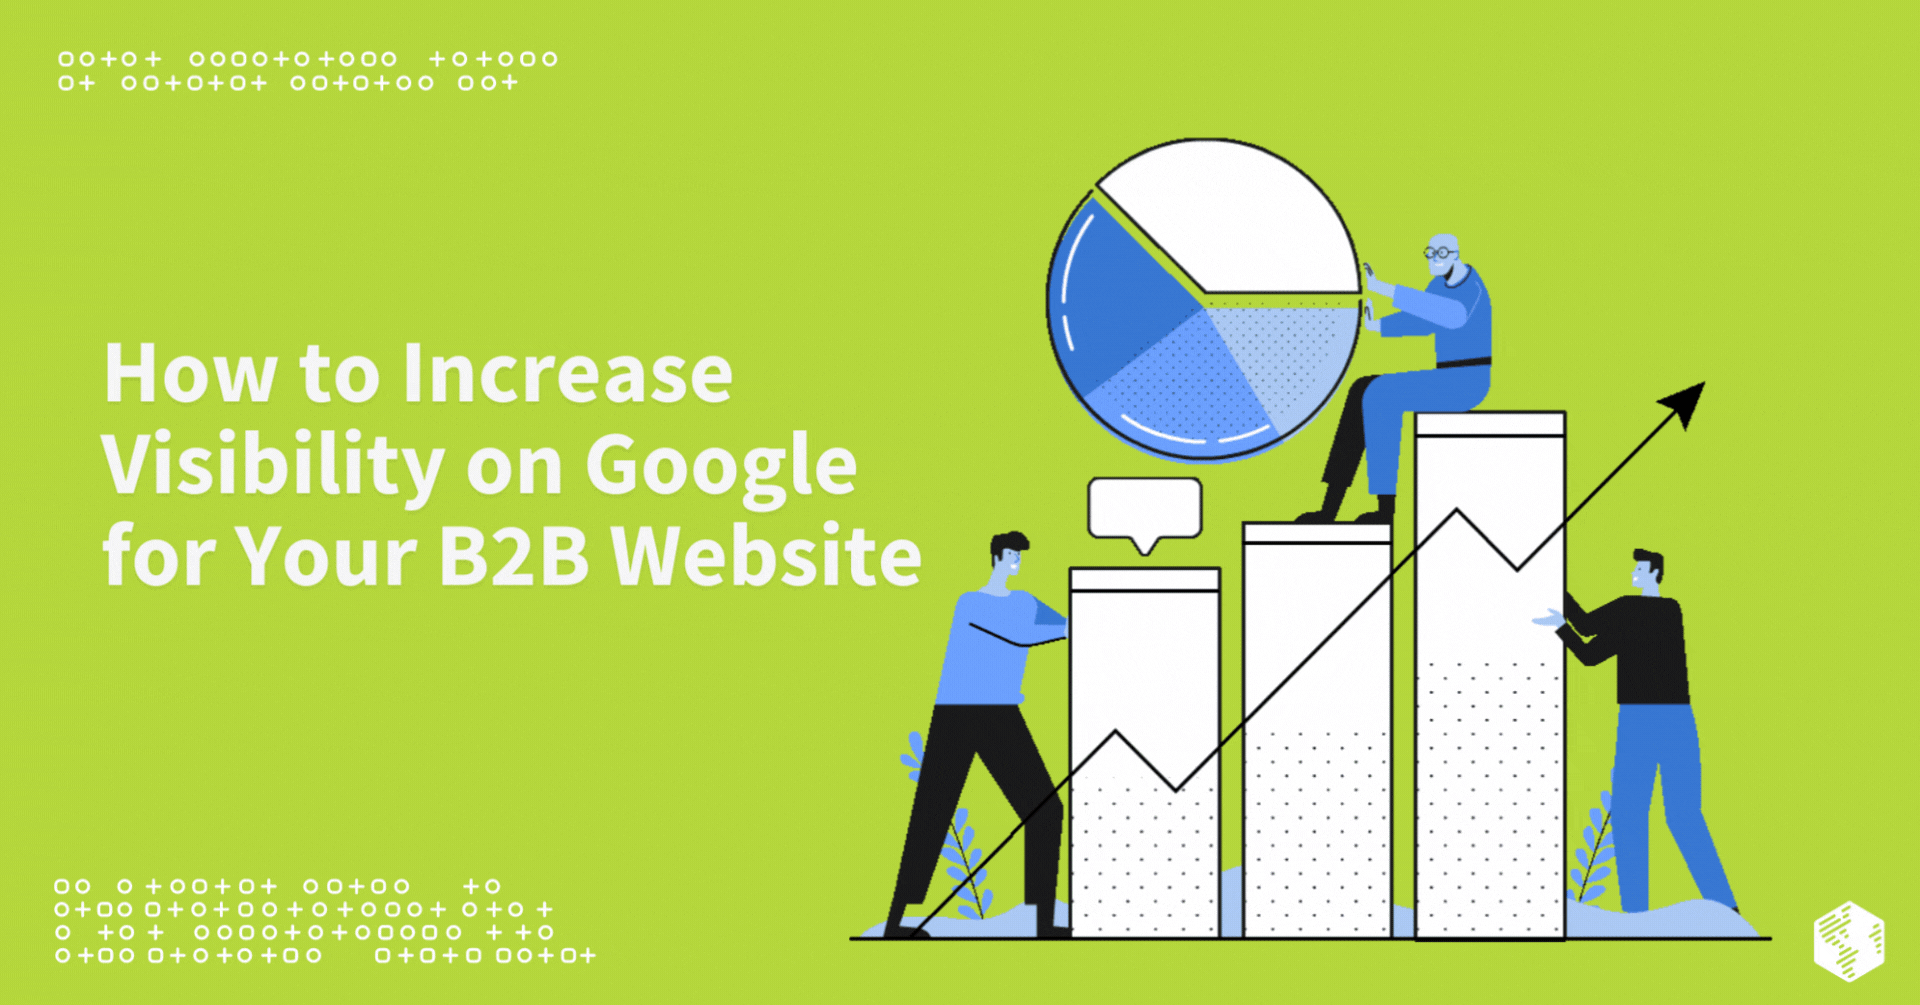 How to Increase Visibility on Google for Your B2B Website